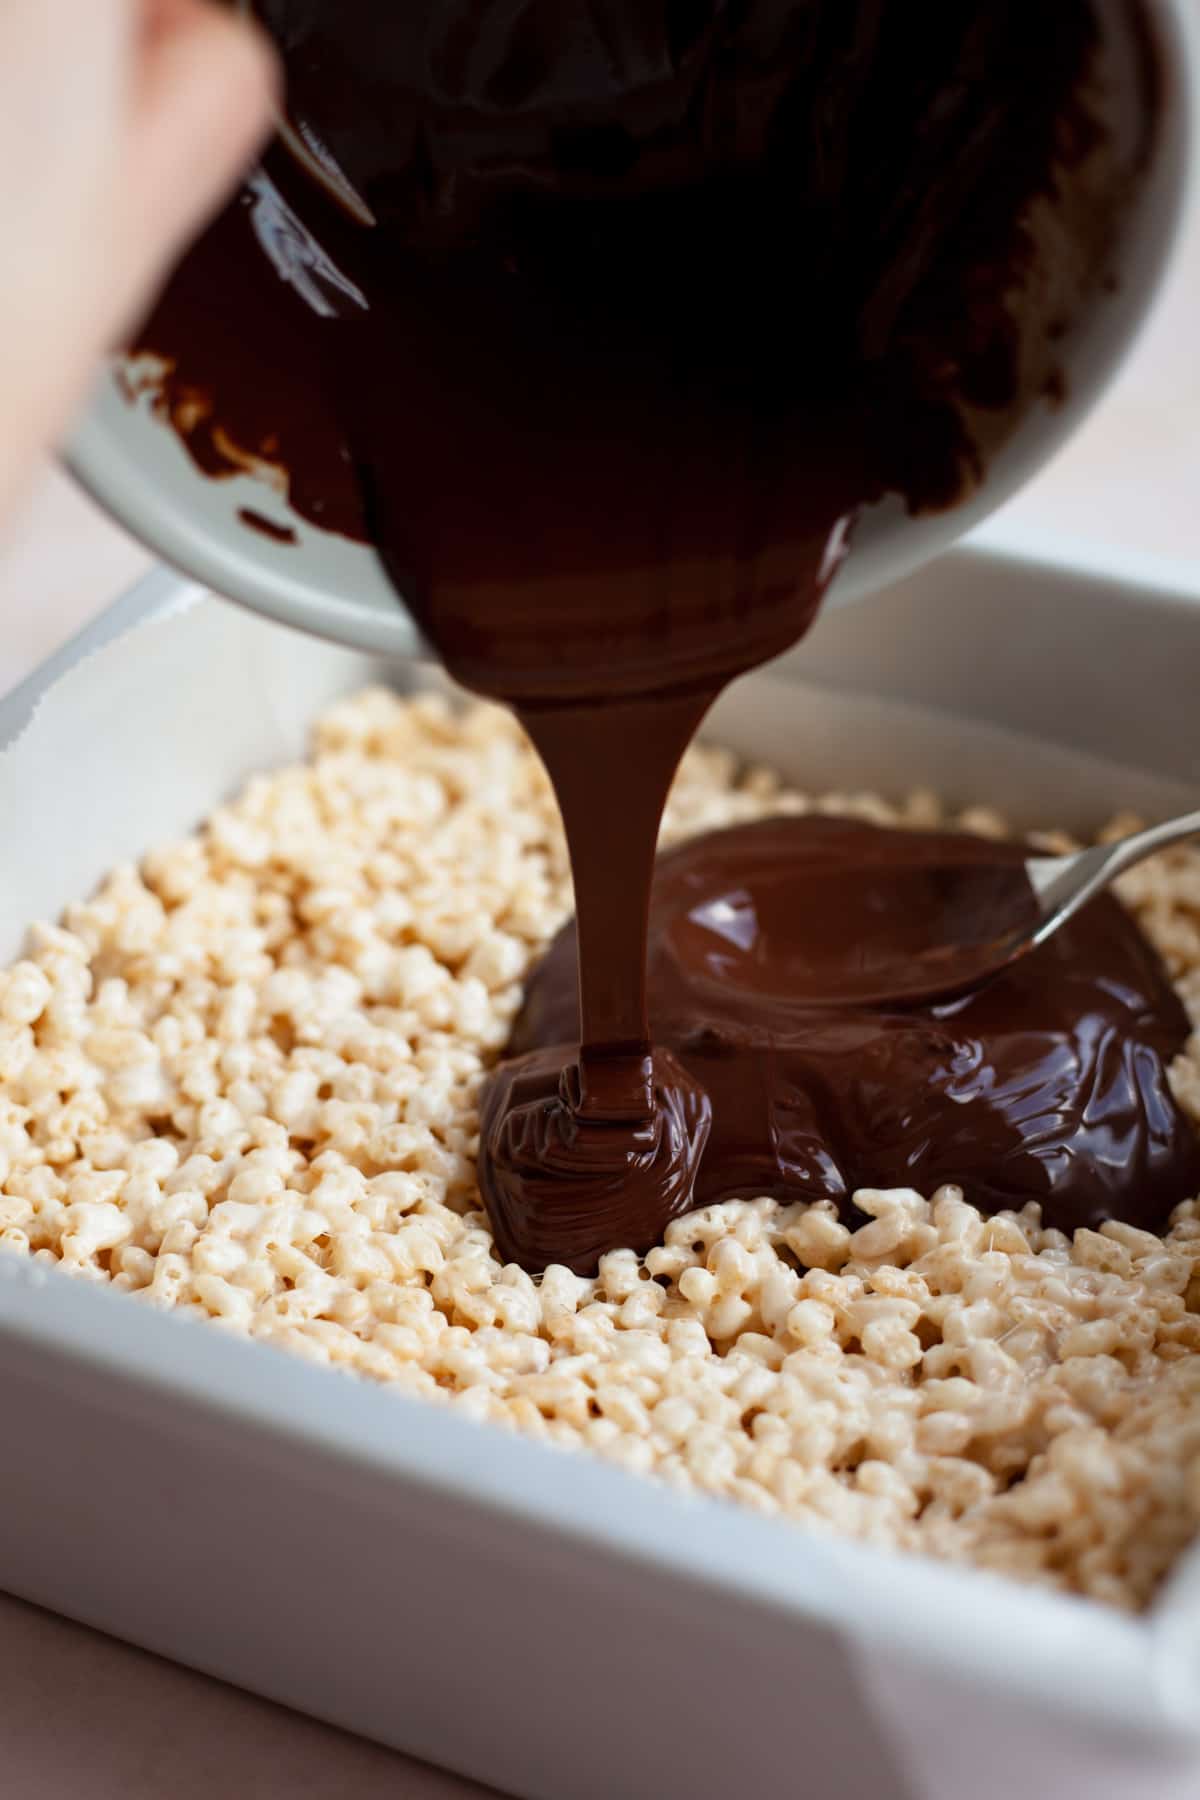 Rice krispie treats packed down into an 8x8 pan, melted chocolate is being poured on top.